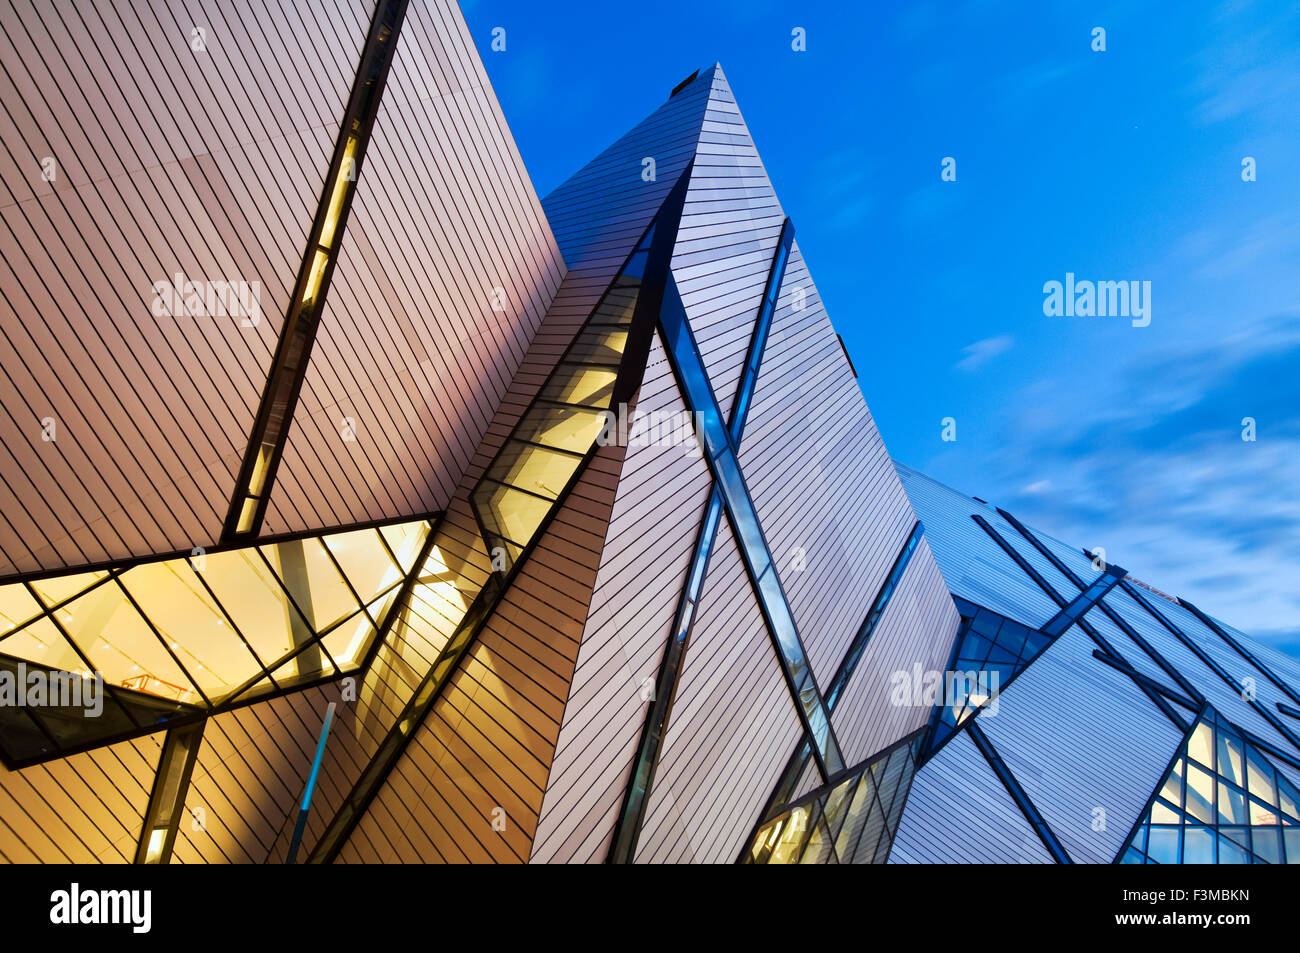 First,Light,Architectural,Architecture,Building Stock Photo